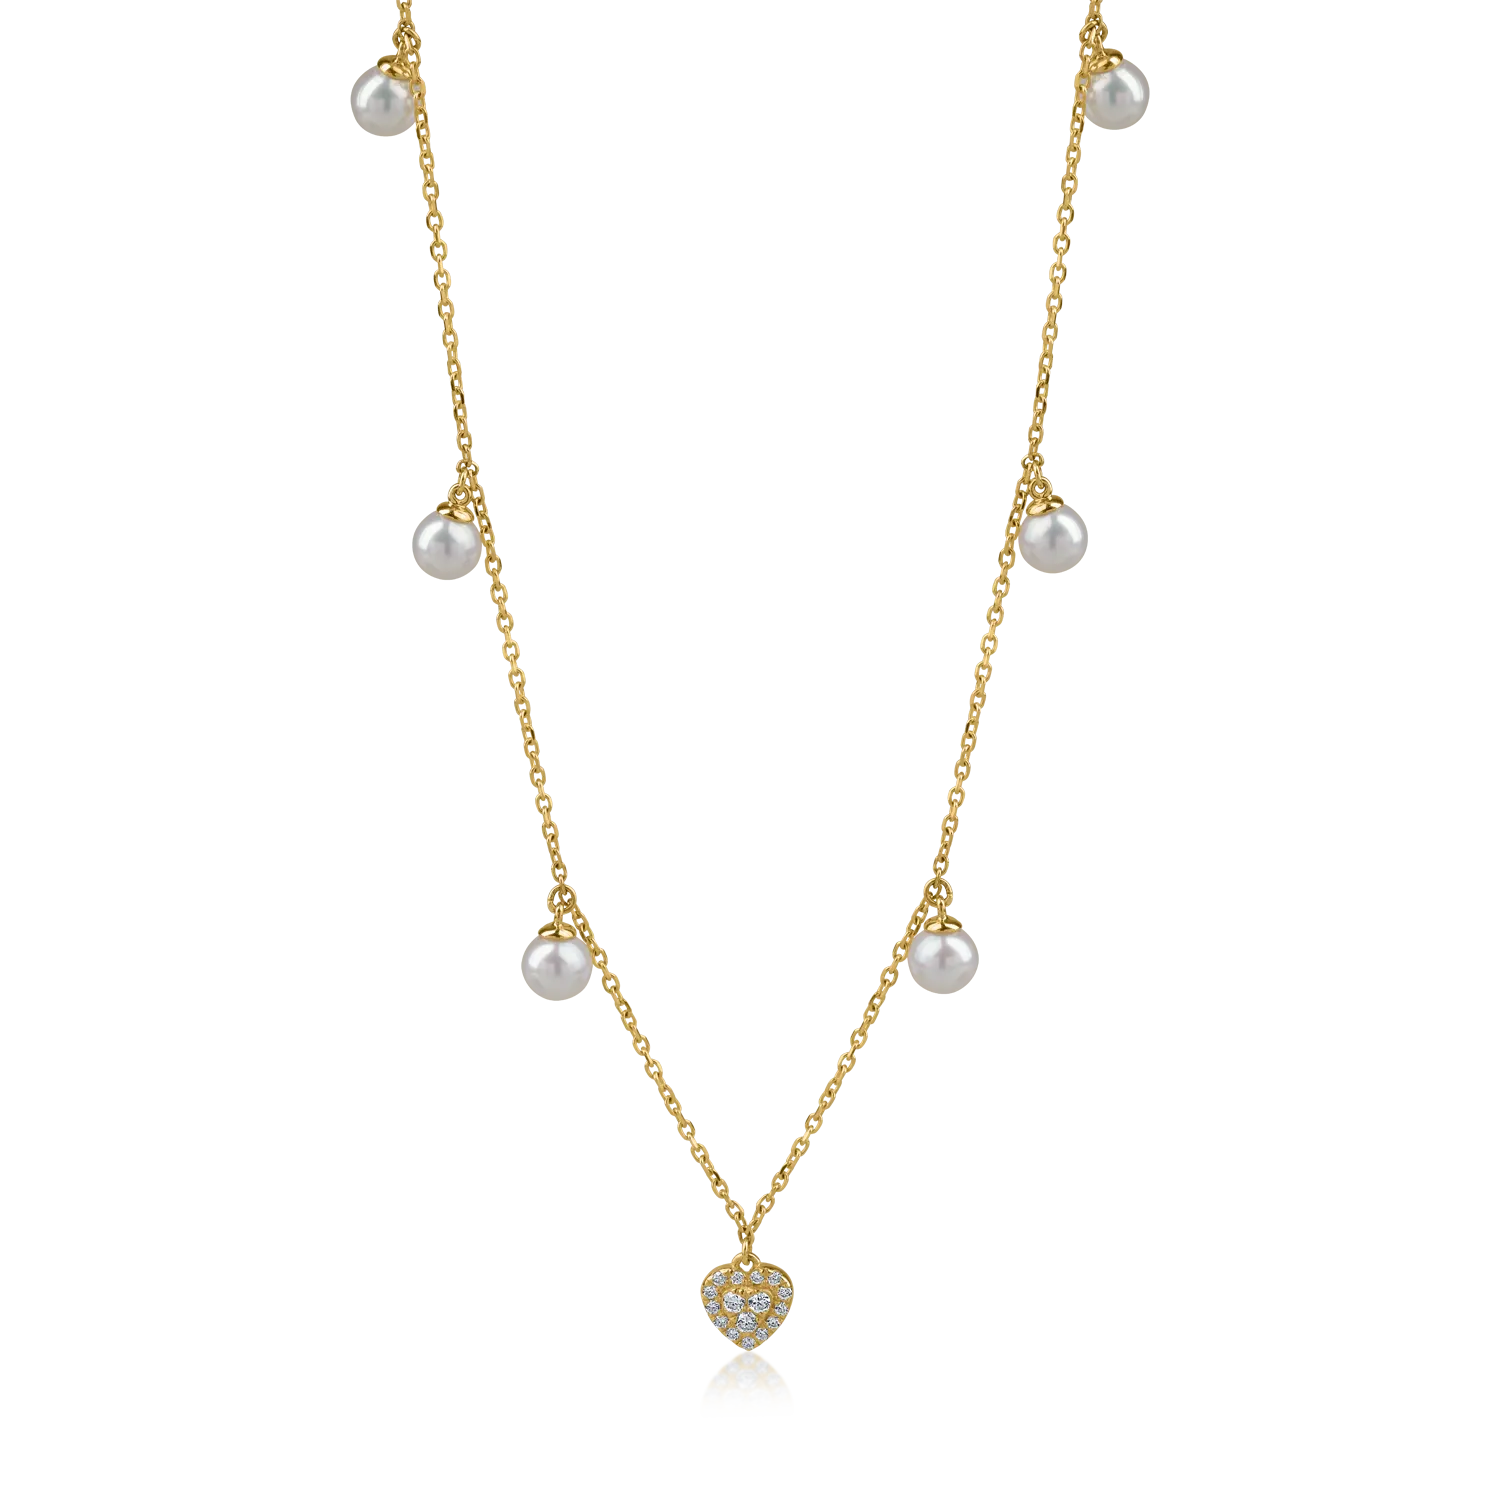 Yellow gold charm necklace with 4.79ct fresh water pearls and 0.09ct diamonds